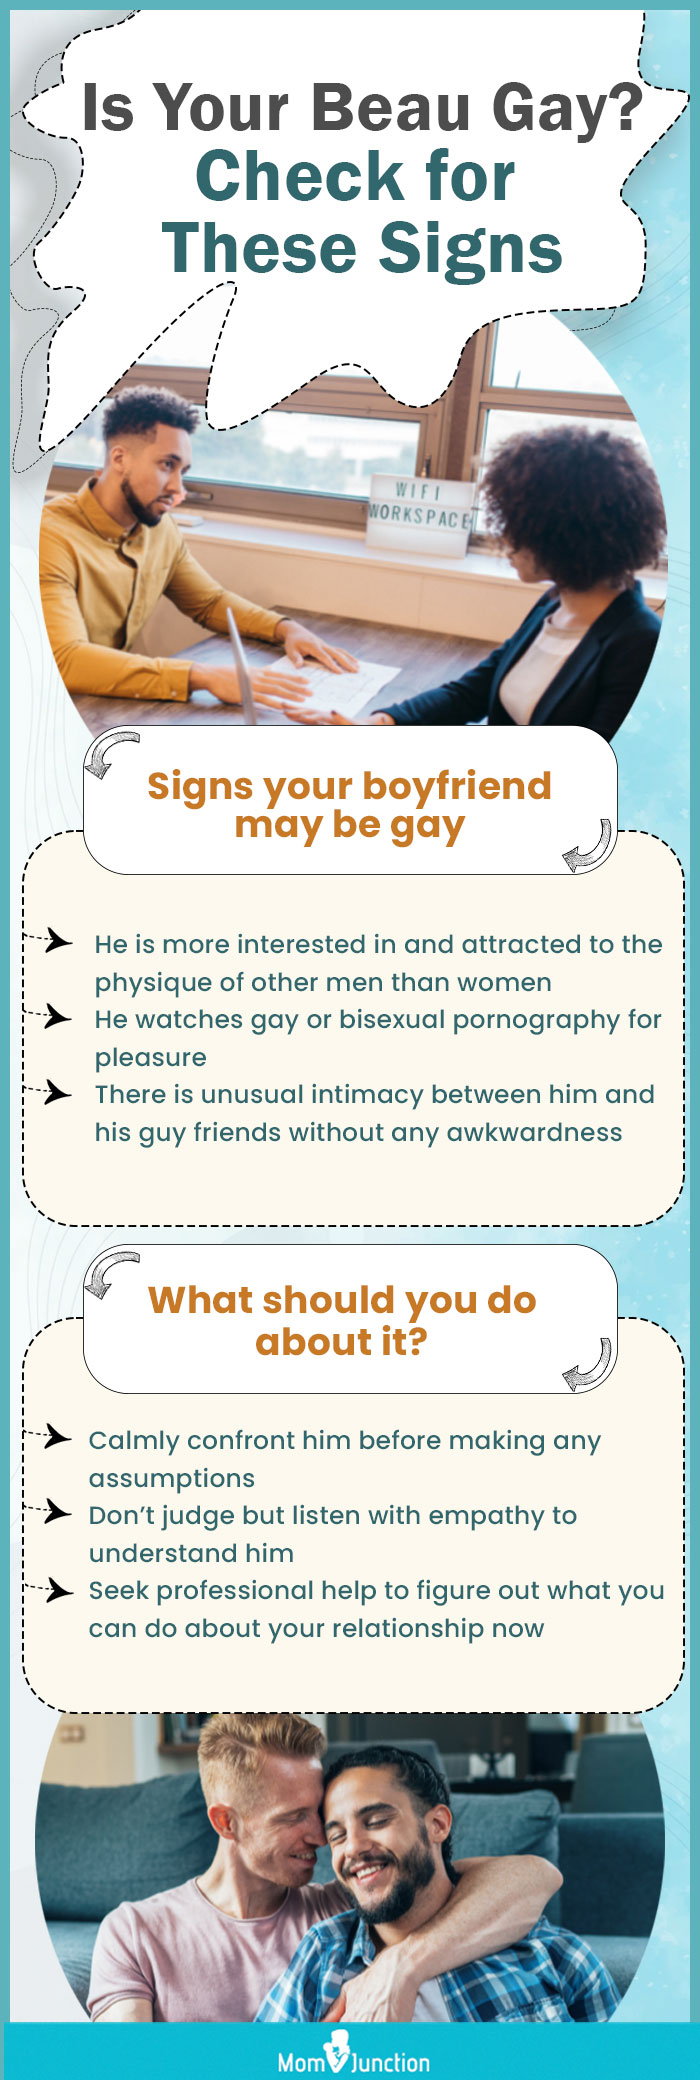 is your beau gay check for these signs (infographic)